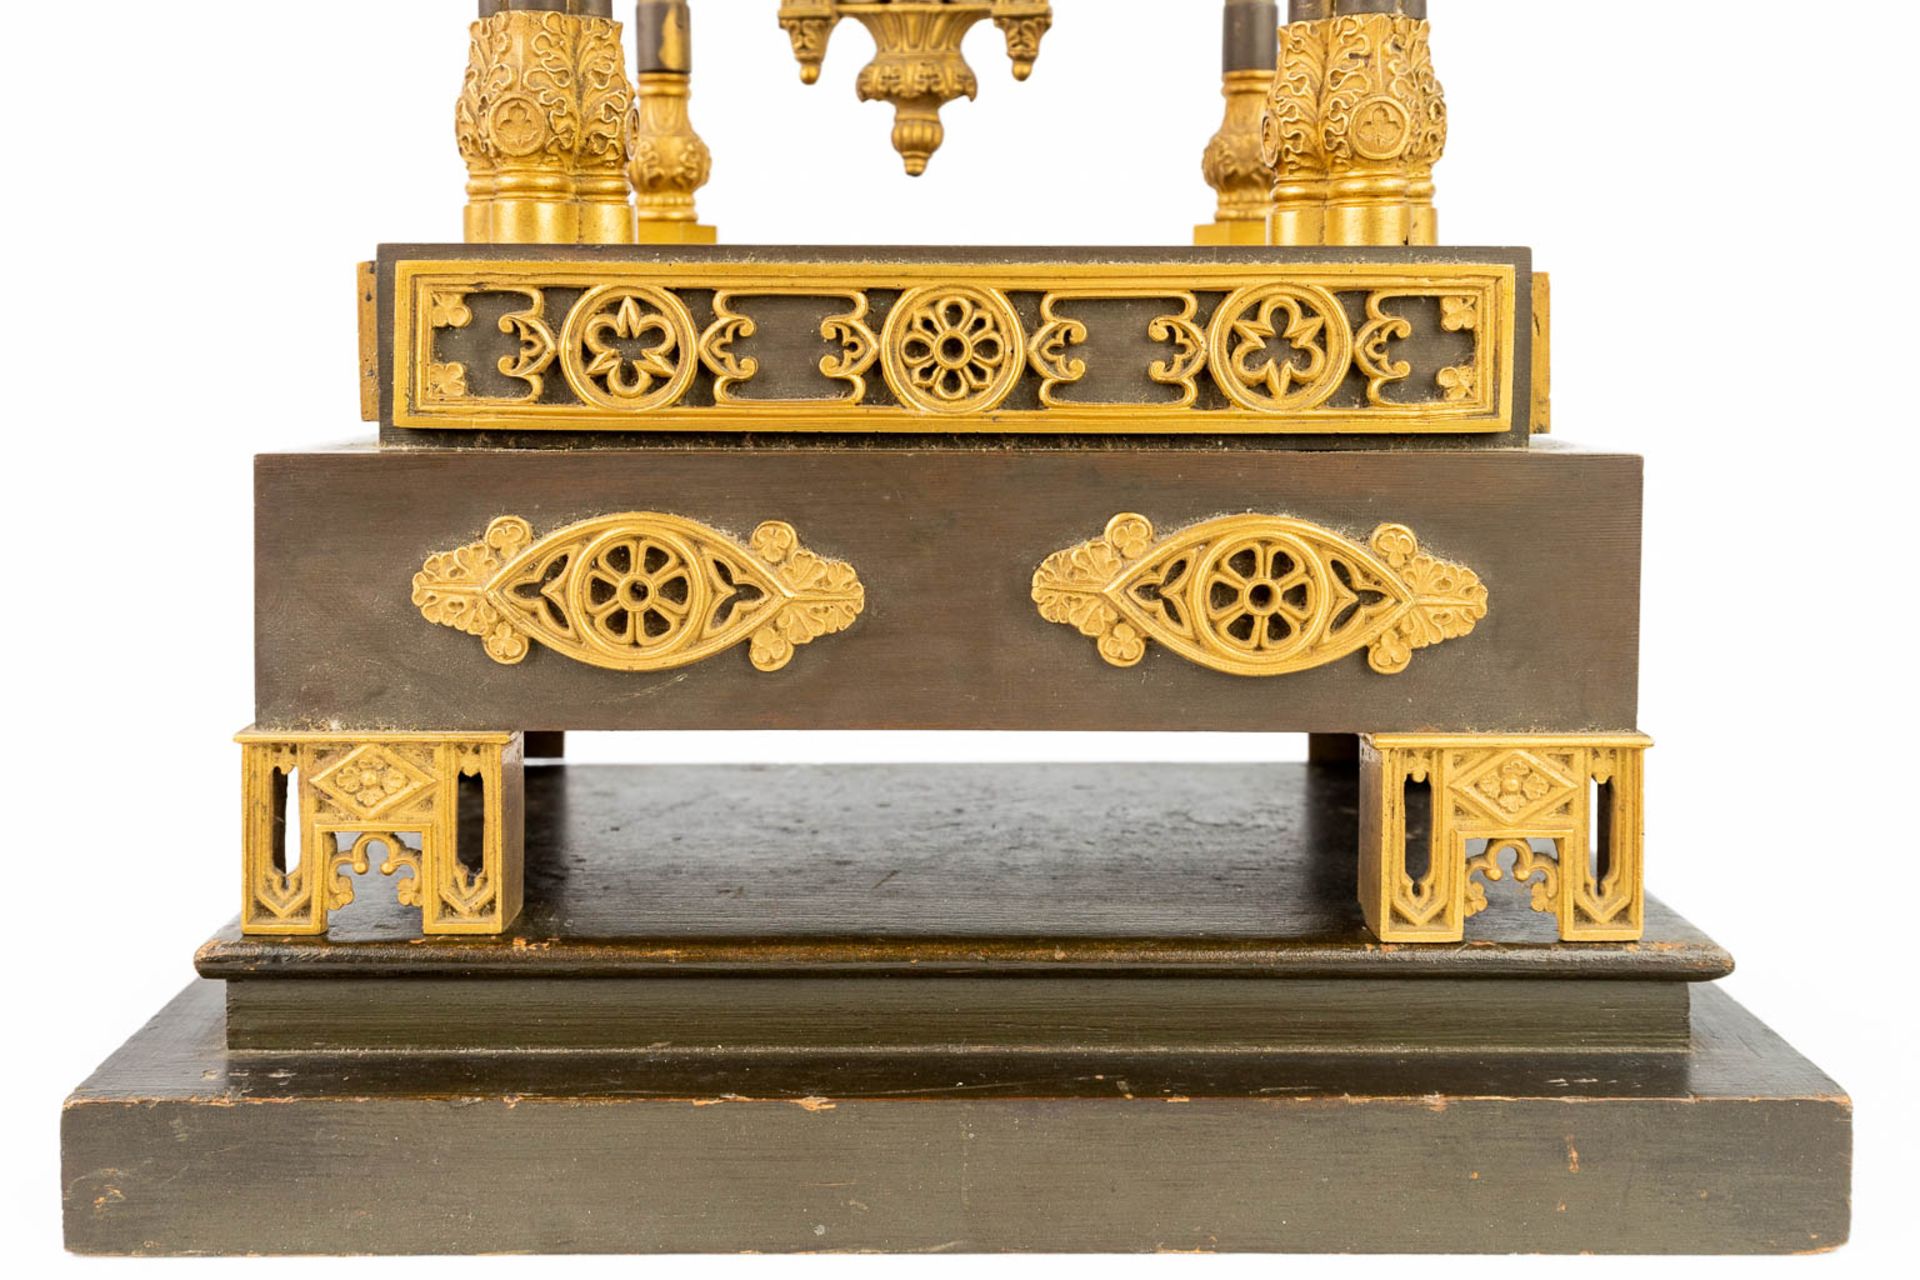 A table column clock made of gilt bronze in a gothic revival style. (11 x 19,5 x 43cm) - Image 13 of 15